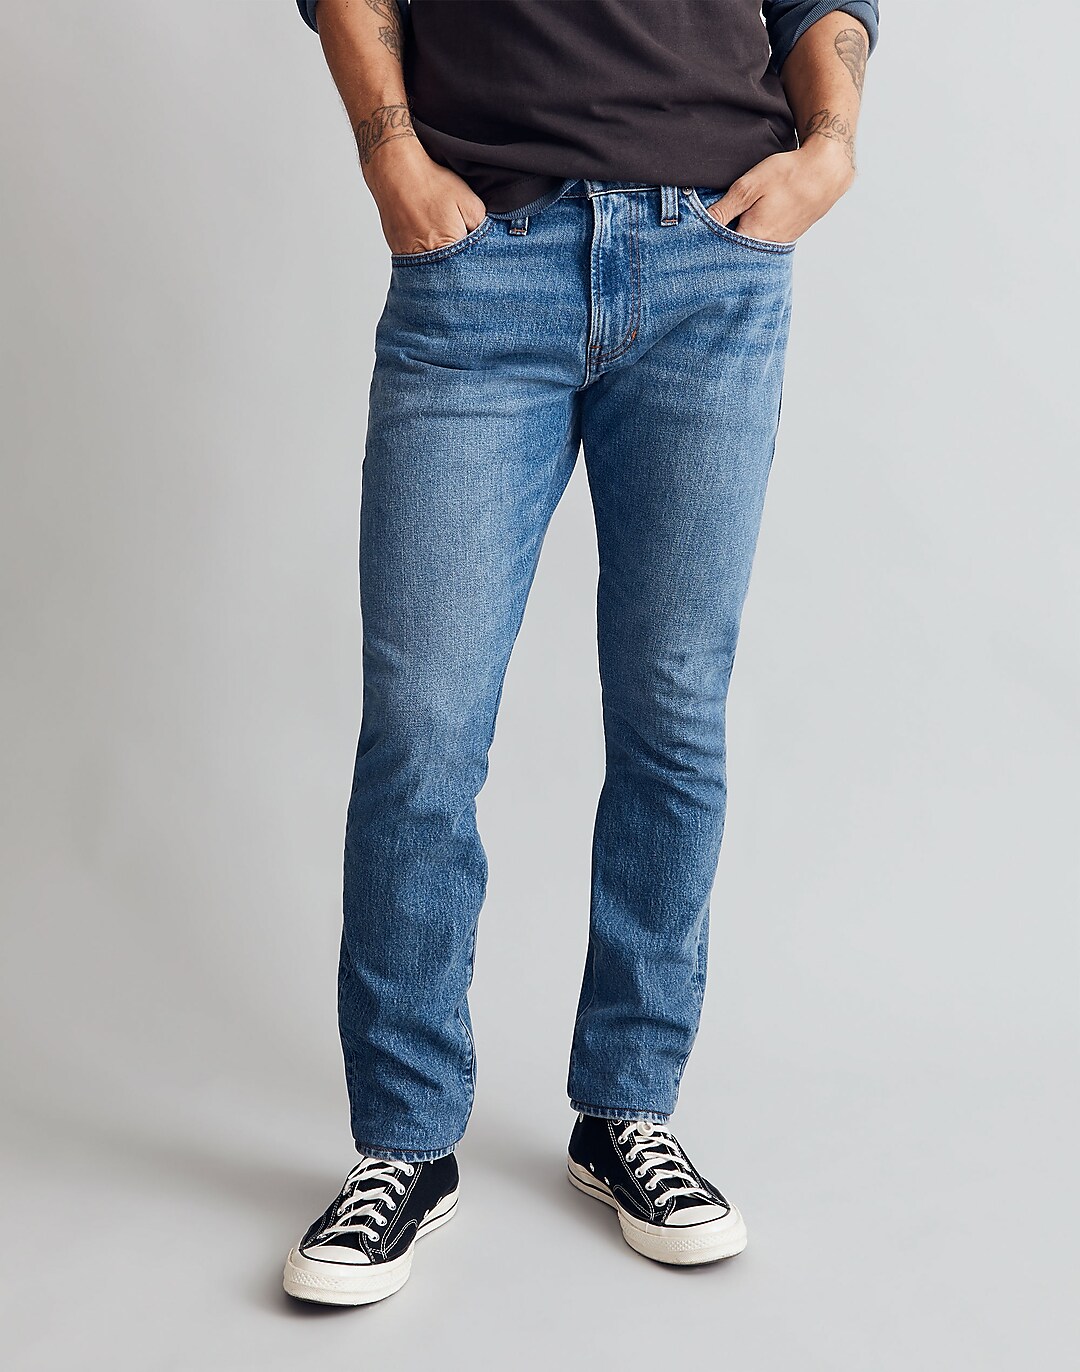 Athletic Slim Jeans in Freemont Wash